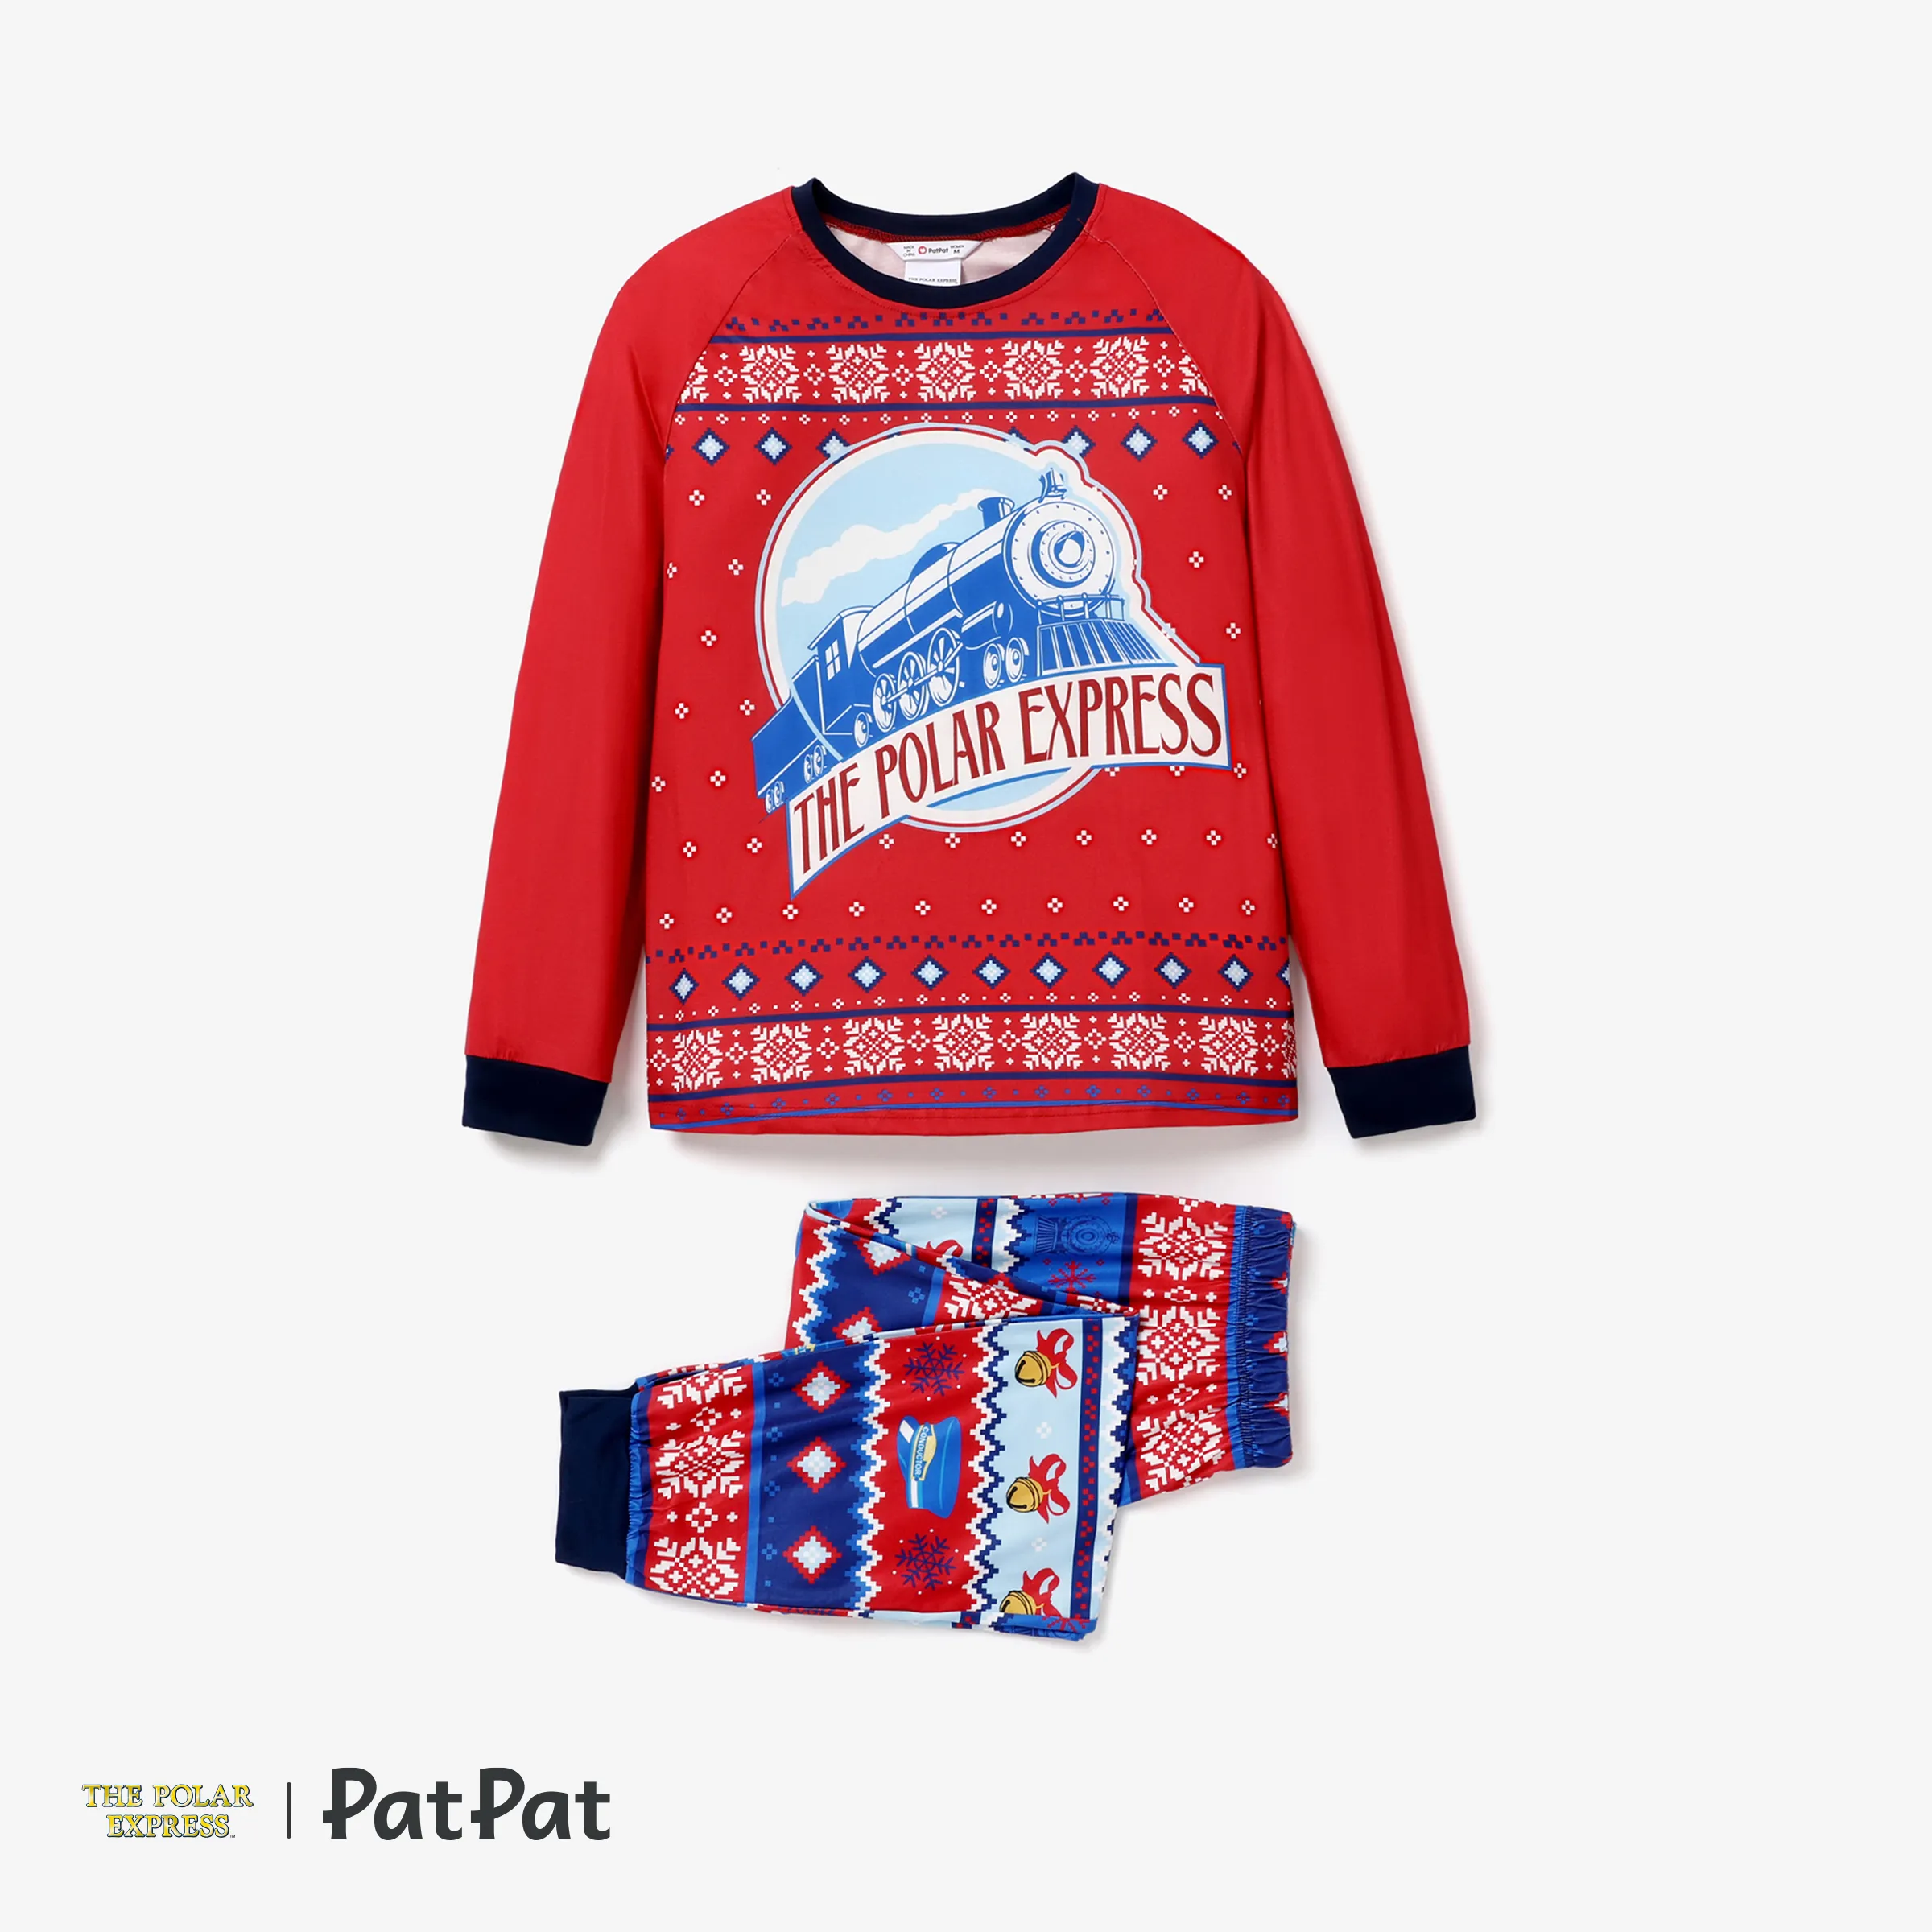 The Polar Express Christmas Family Matching Big Graphic Allover Pajamas (Flame Resistant)